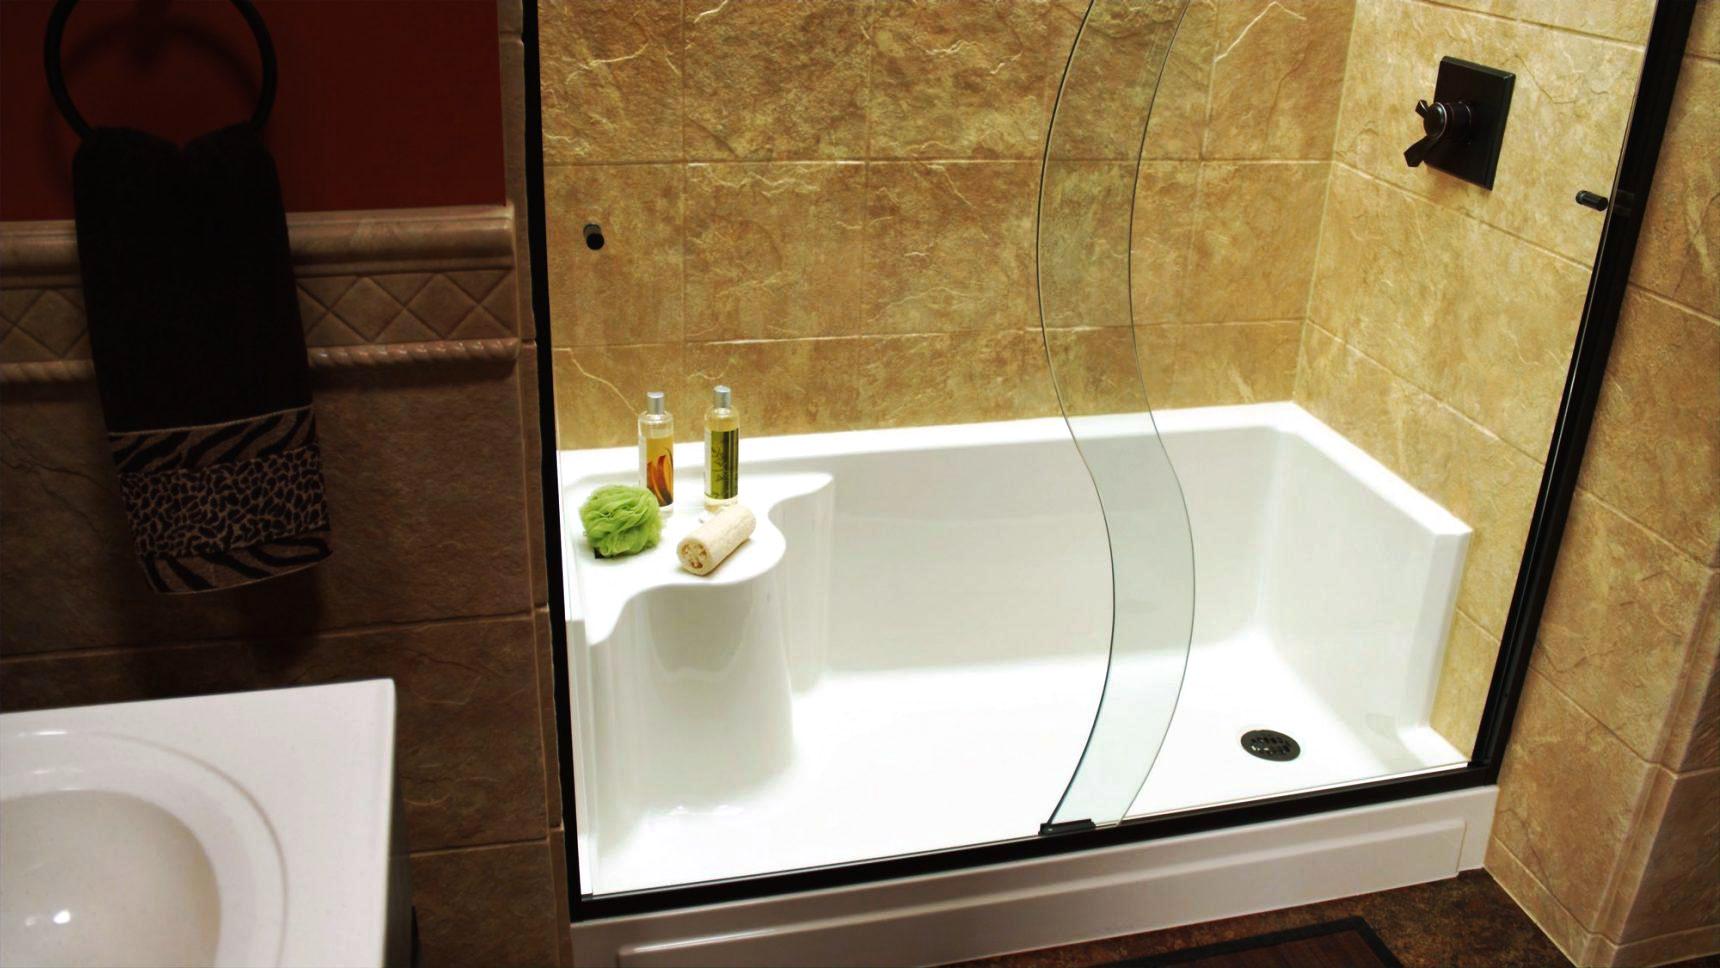 Bathtub Cost For Small Place